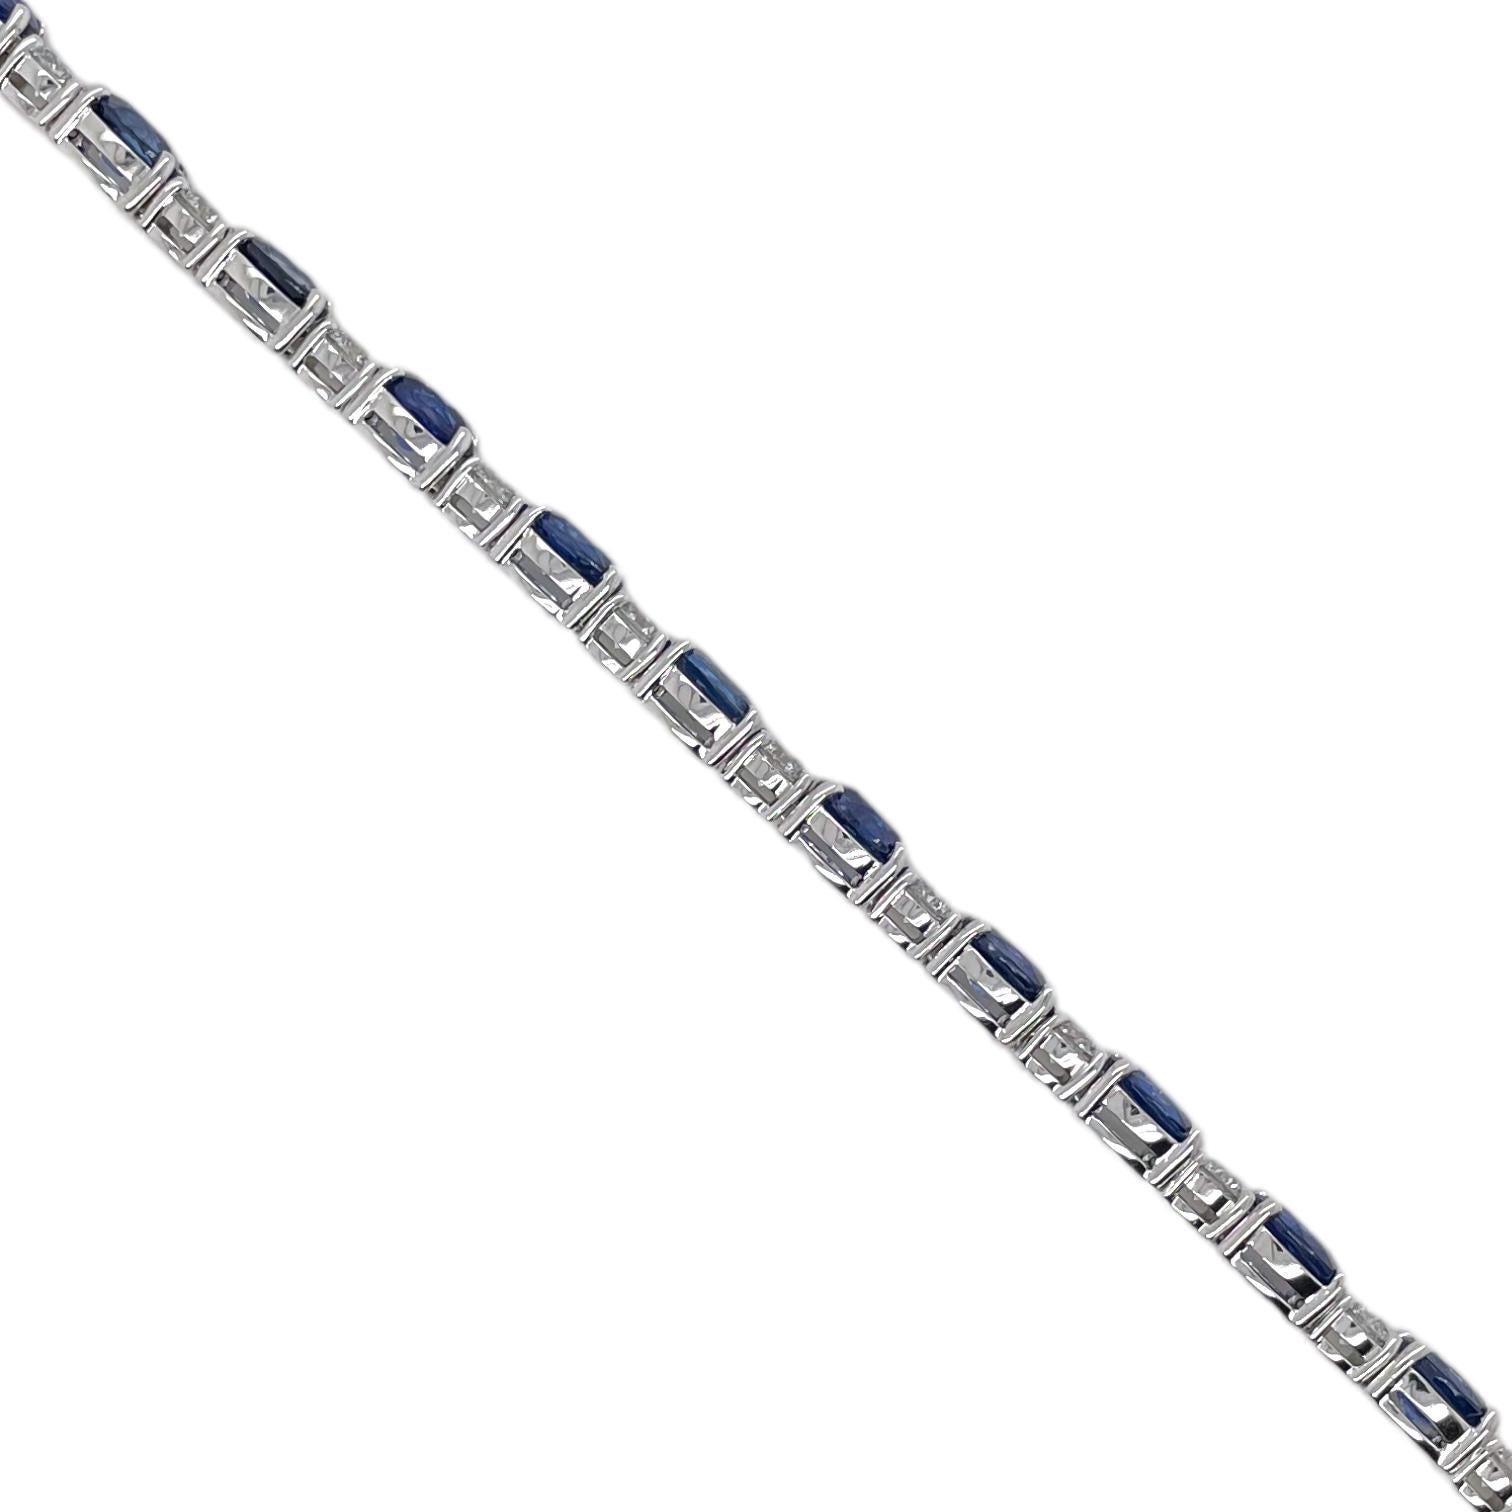 Finely matched oval cut sapphire and round brilliant diamond straight row bracelet in 18k white gold. Bracelet contains 18 oval cut sapphires, 14.07tcw and 18 round brilliant diamonds, 3.50tcw. Diamonds are G in color and VS2 in clarity. All stones